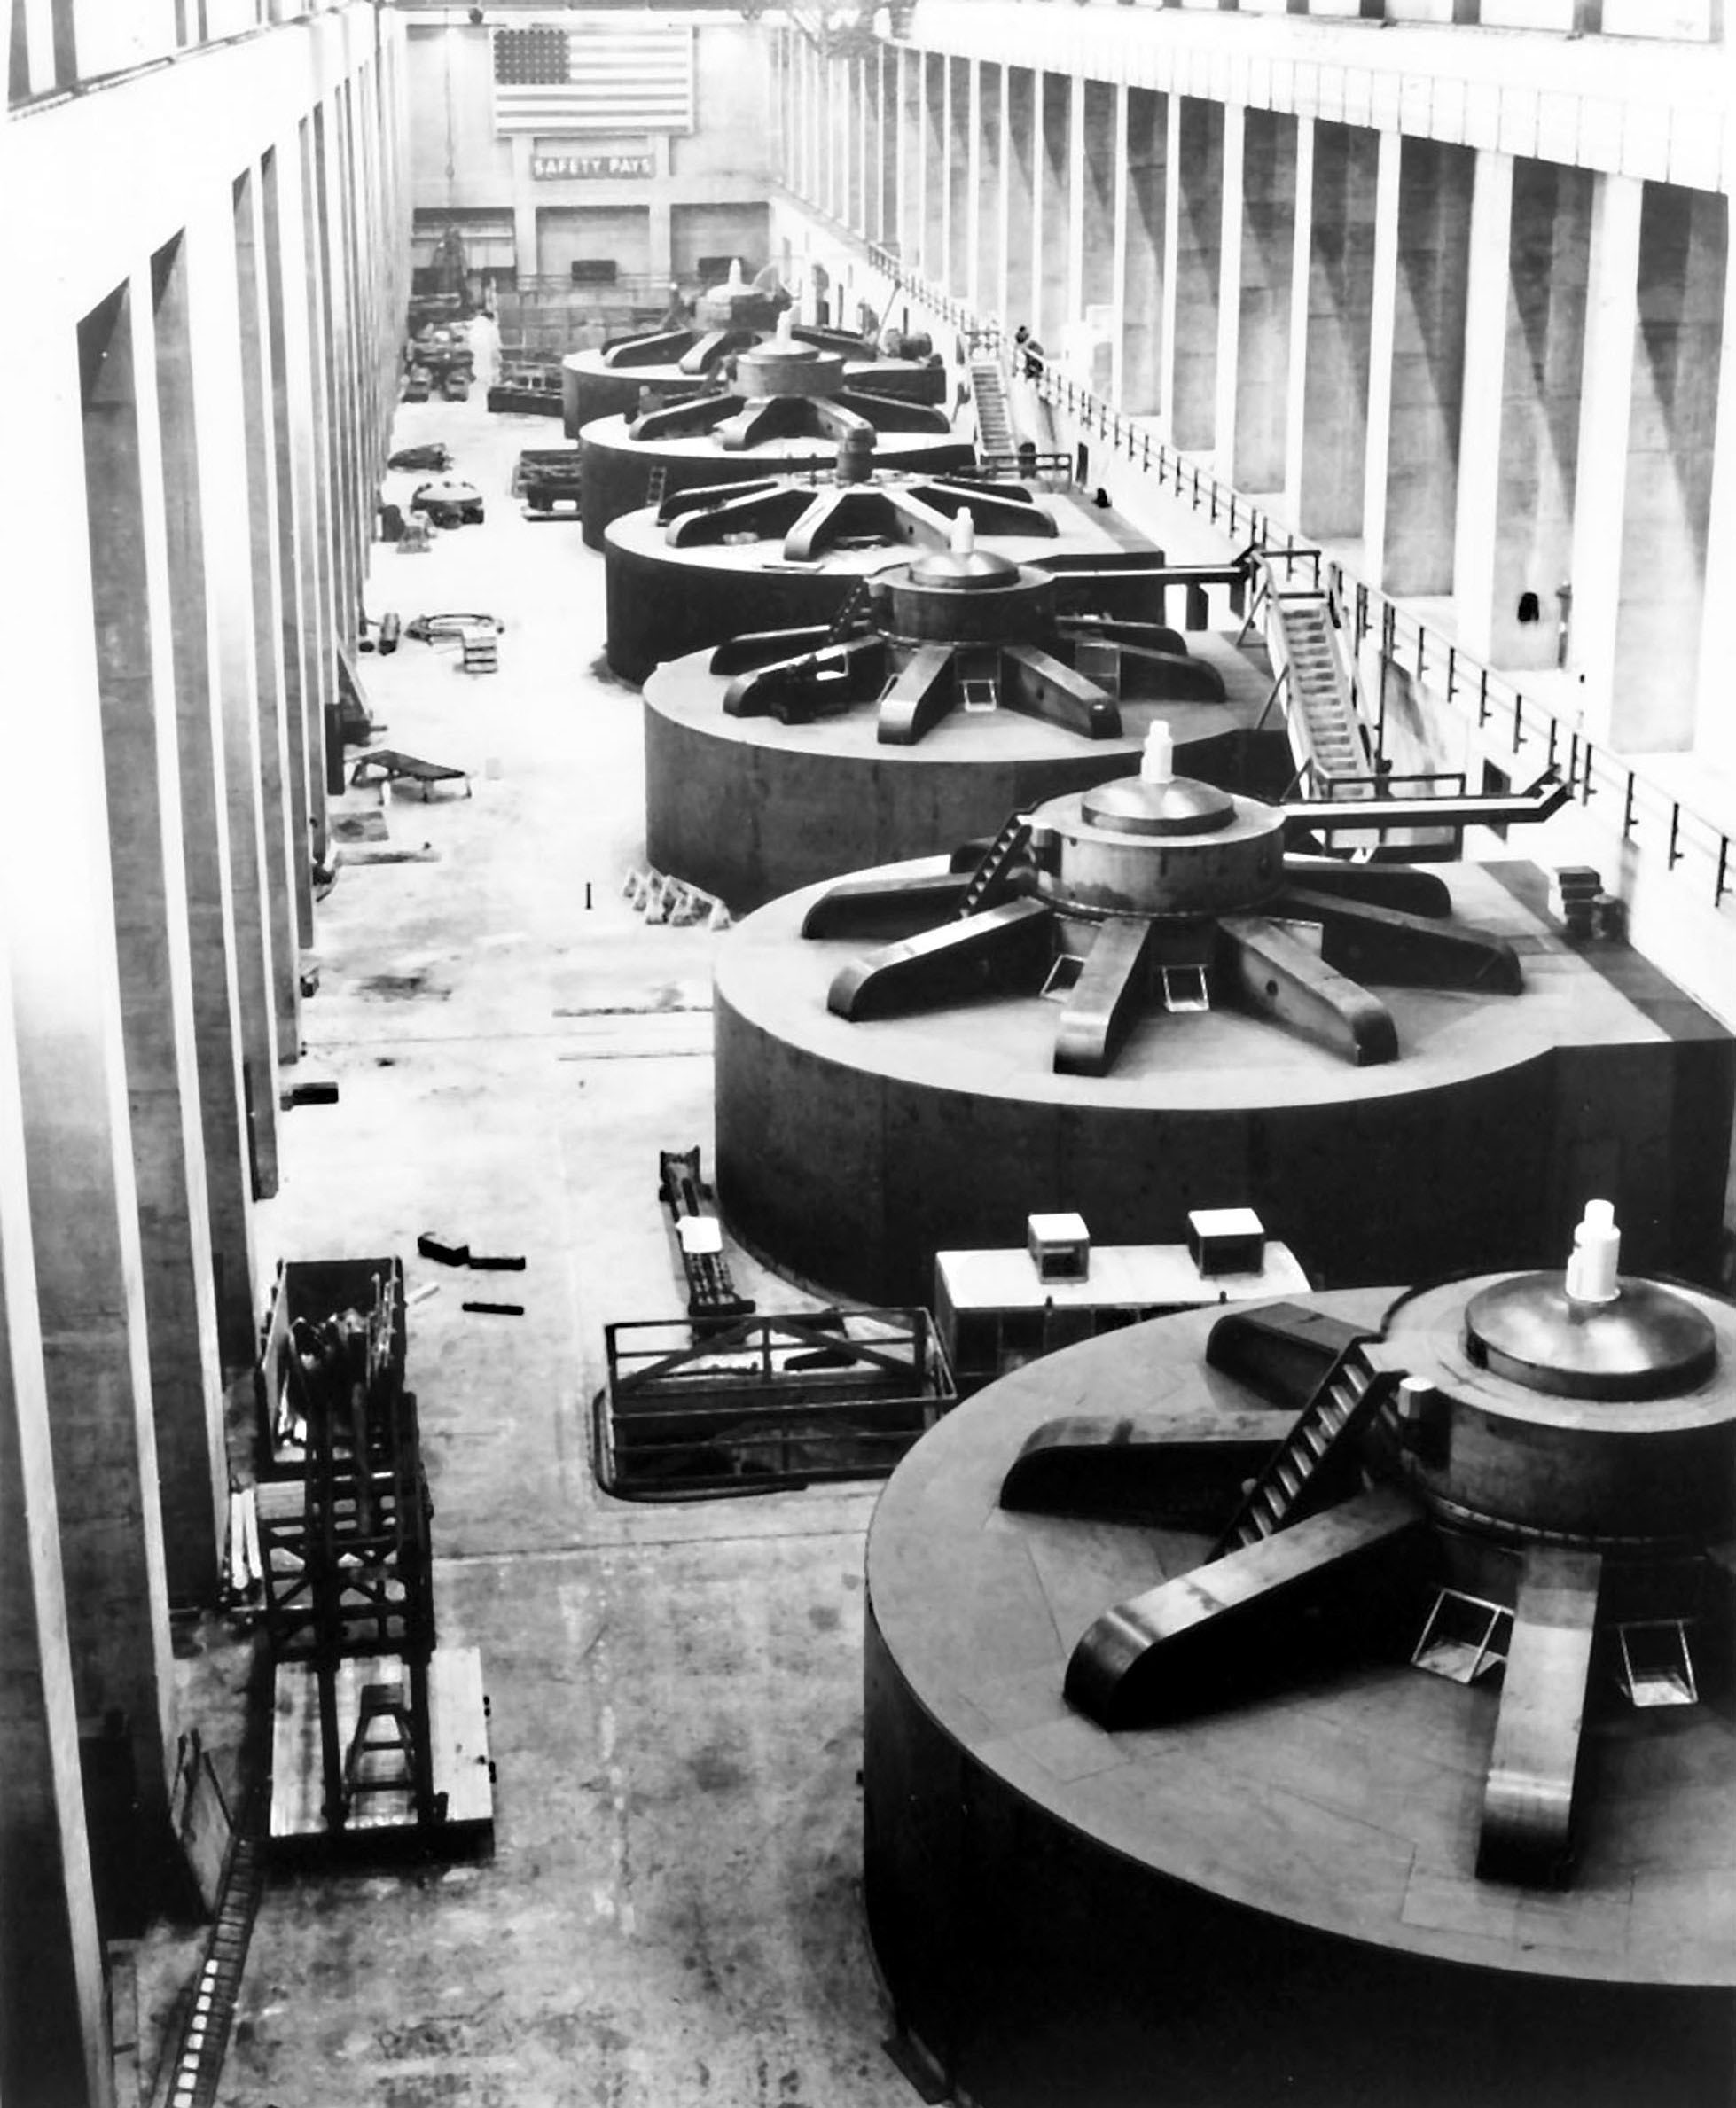 December 29, 1943. Interior of the west powerhouse at Grand Coulee Dam.